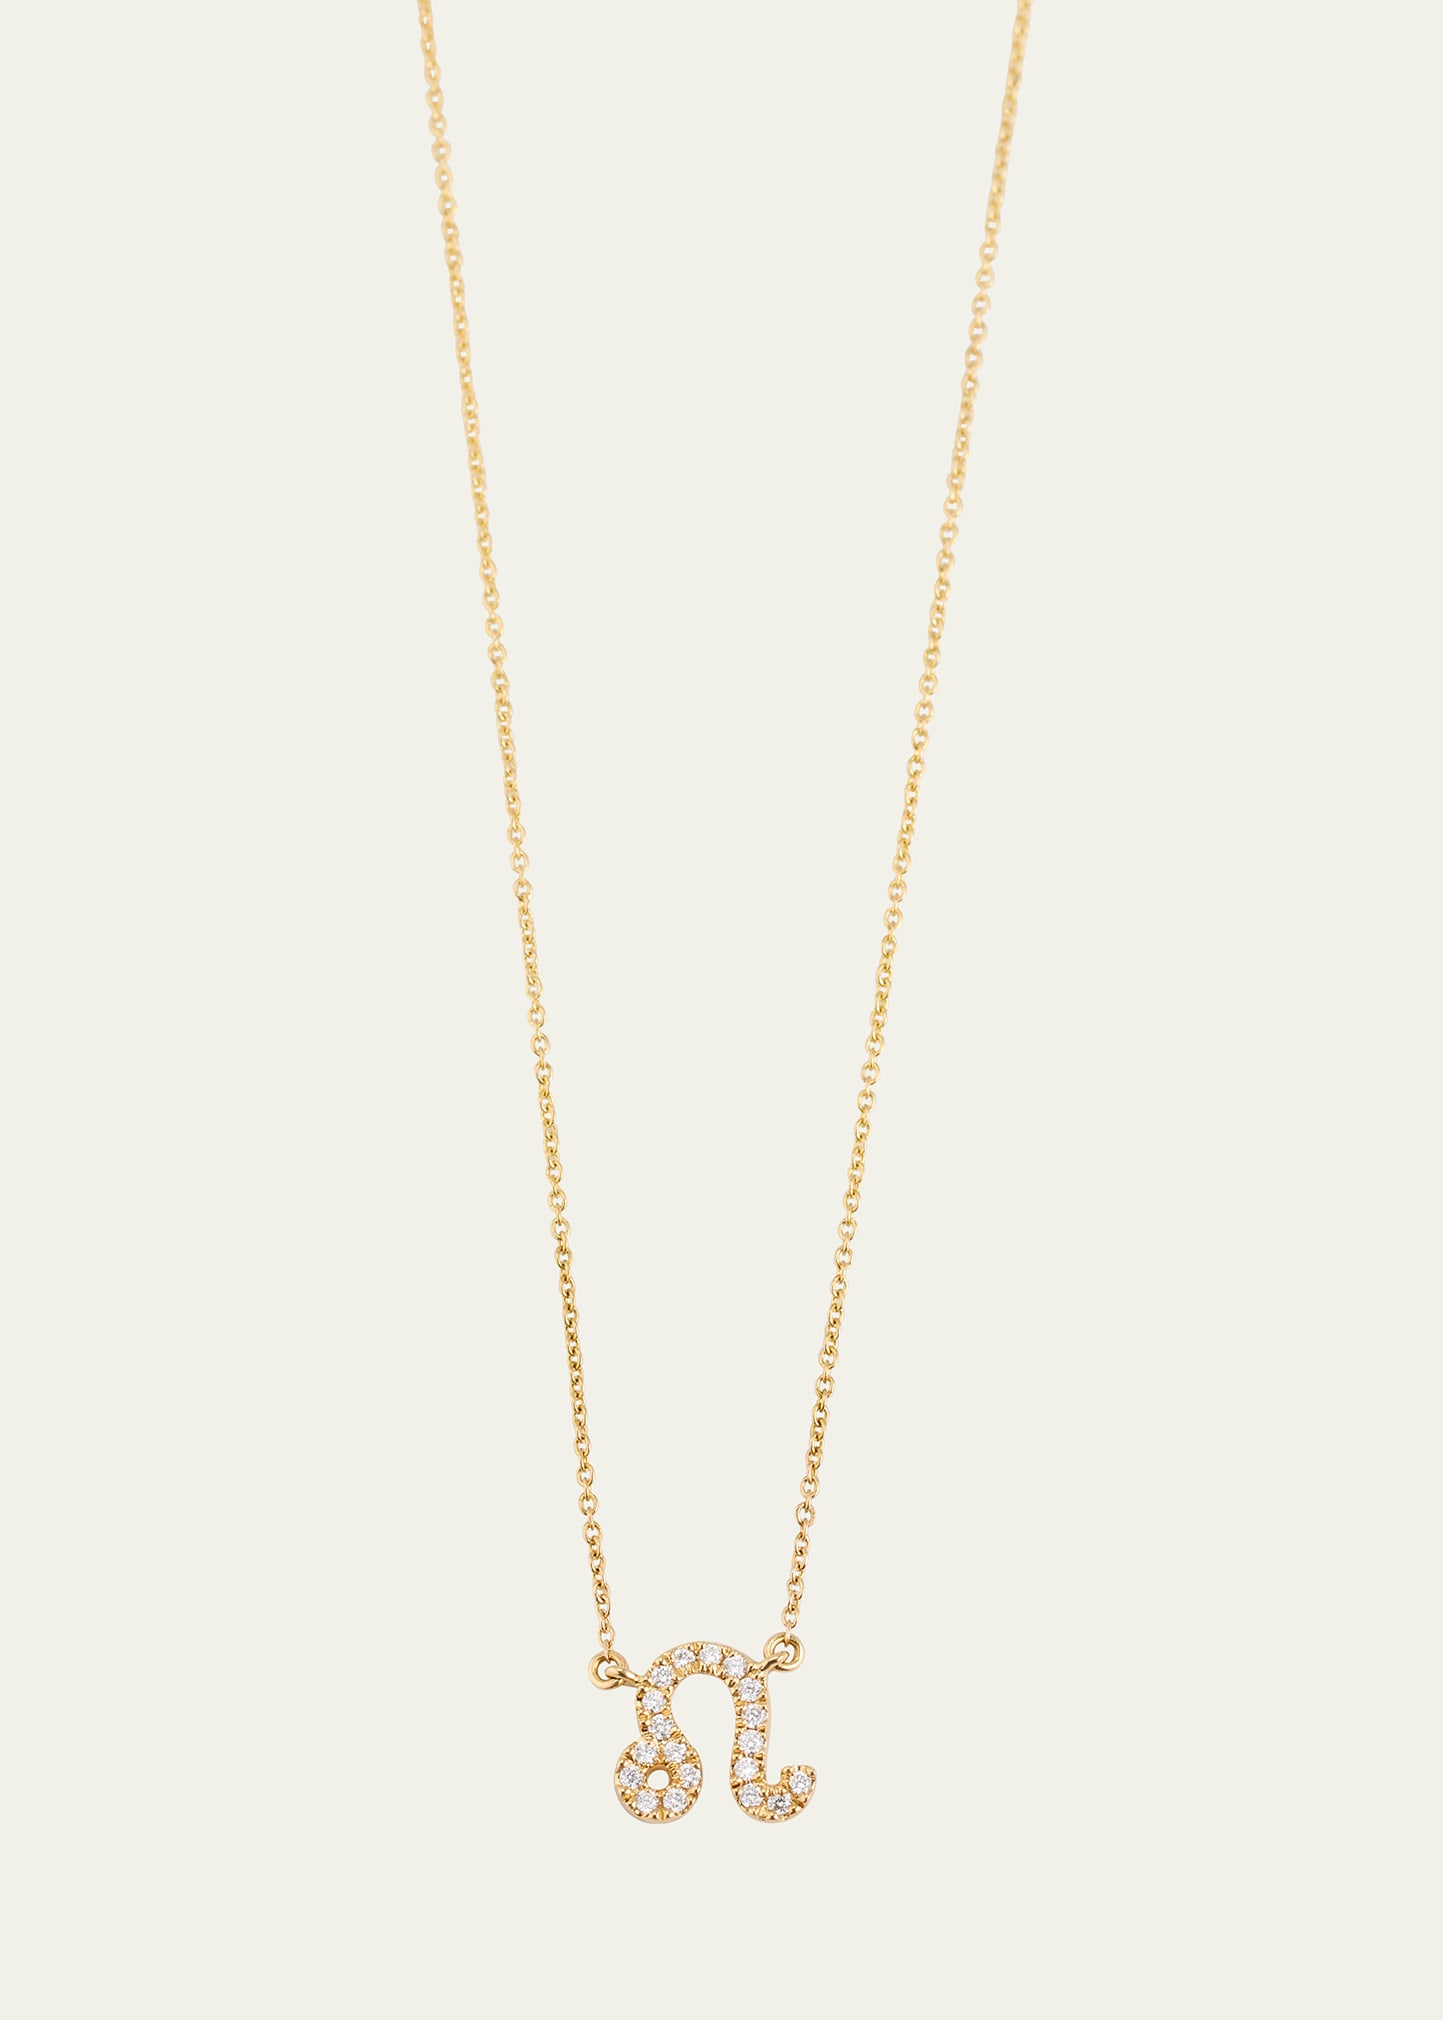 Star Sign Necklace, Leo, in Yellow Gold and White Diamonds